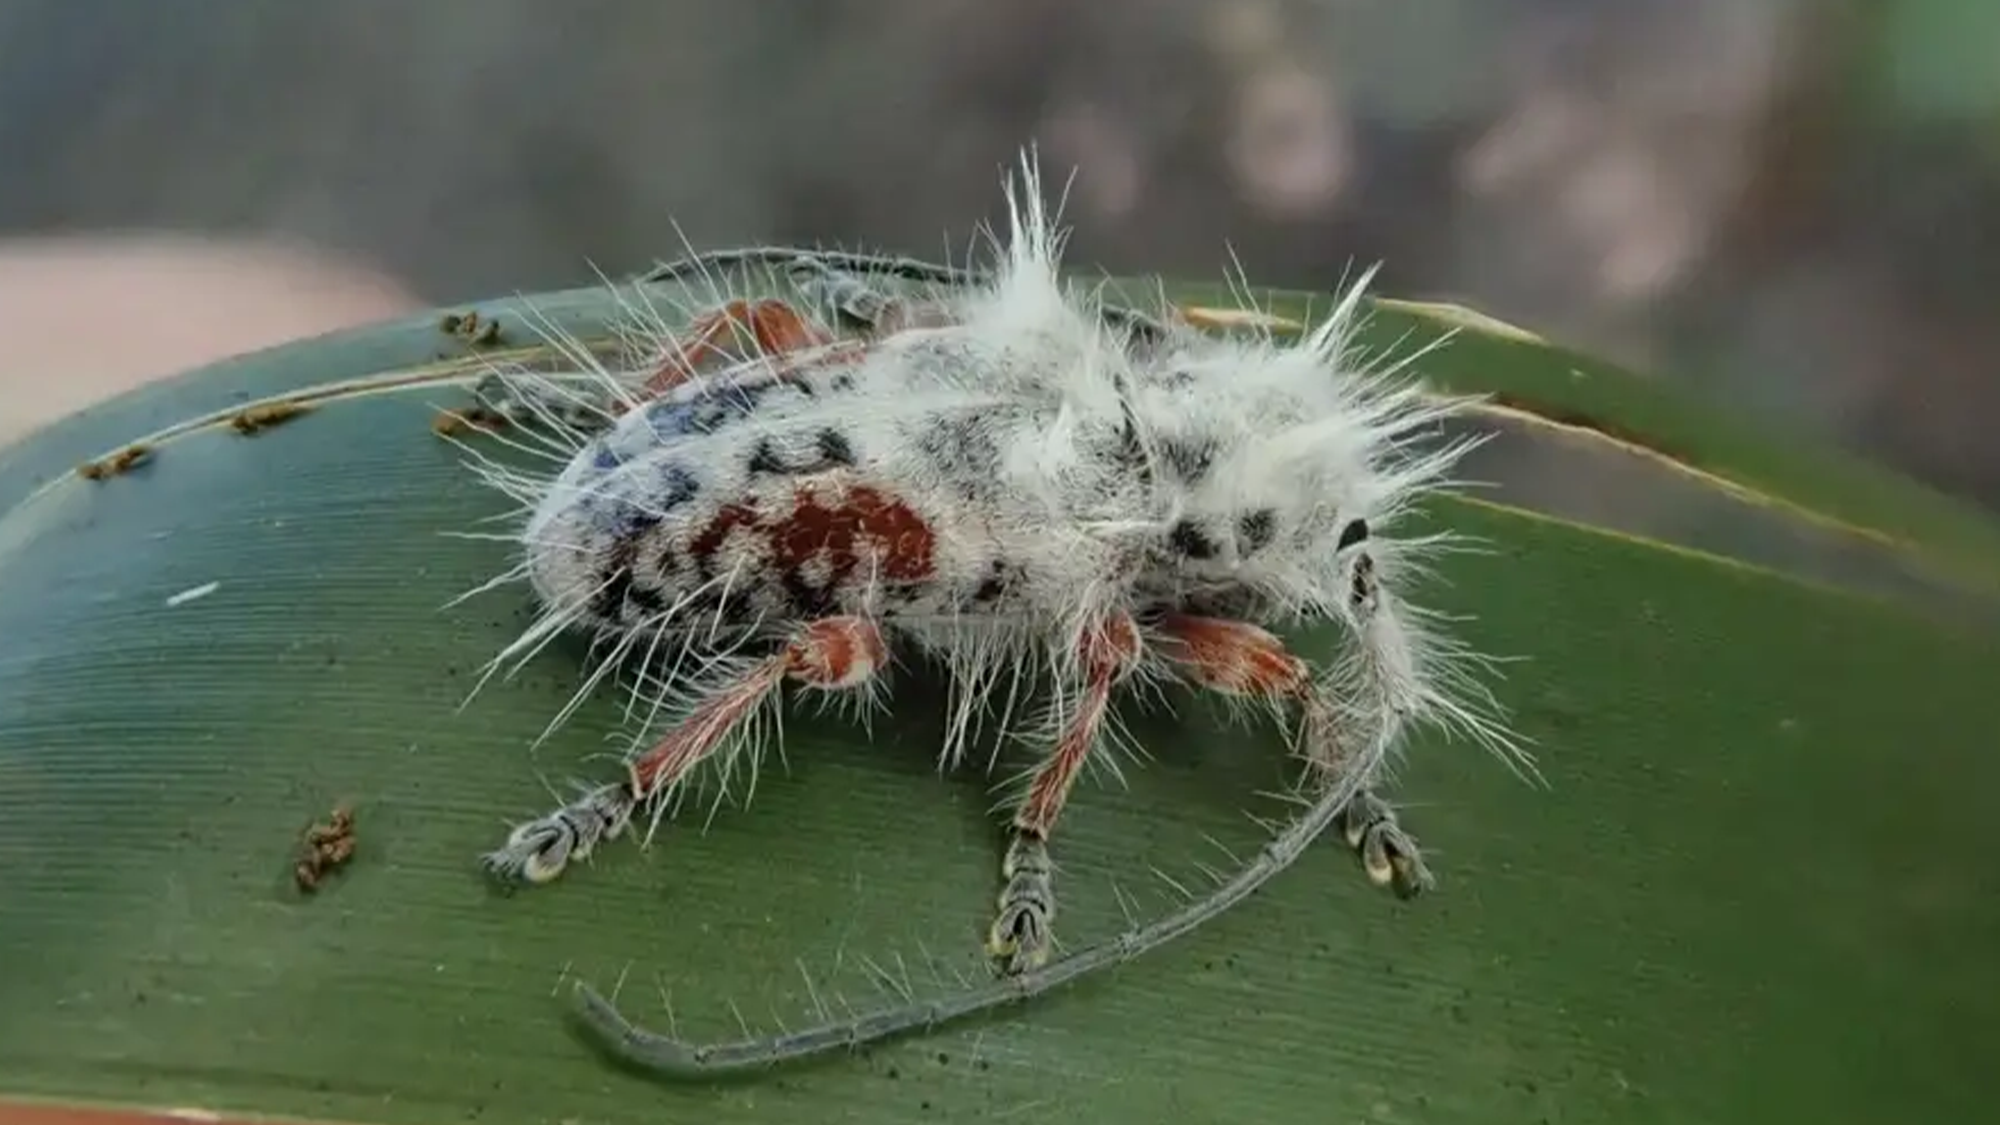 New fluffy longhorn beetle discovered in Australia | Popular Science